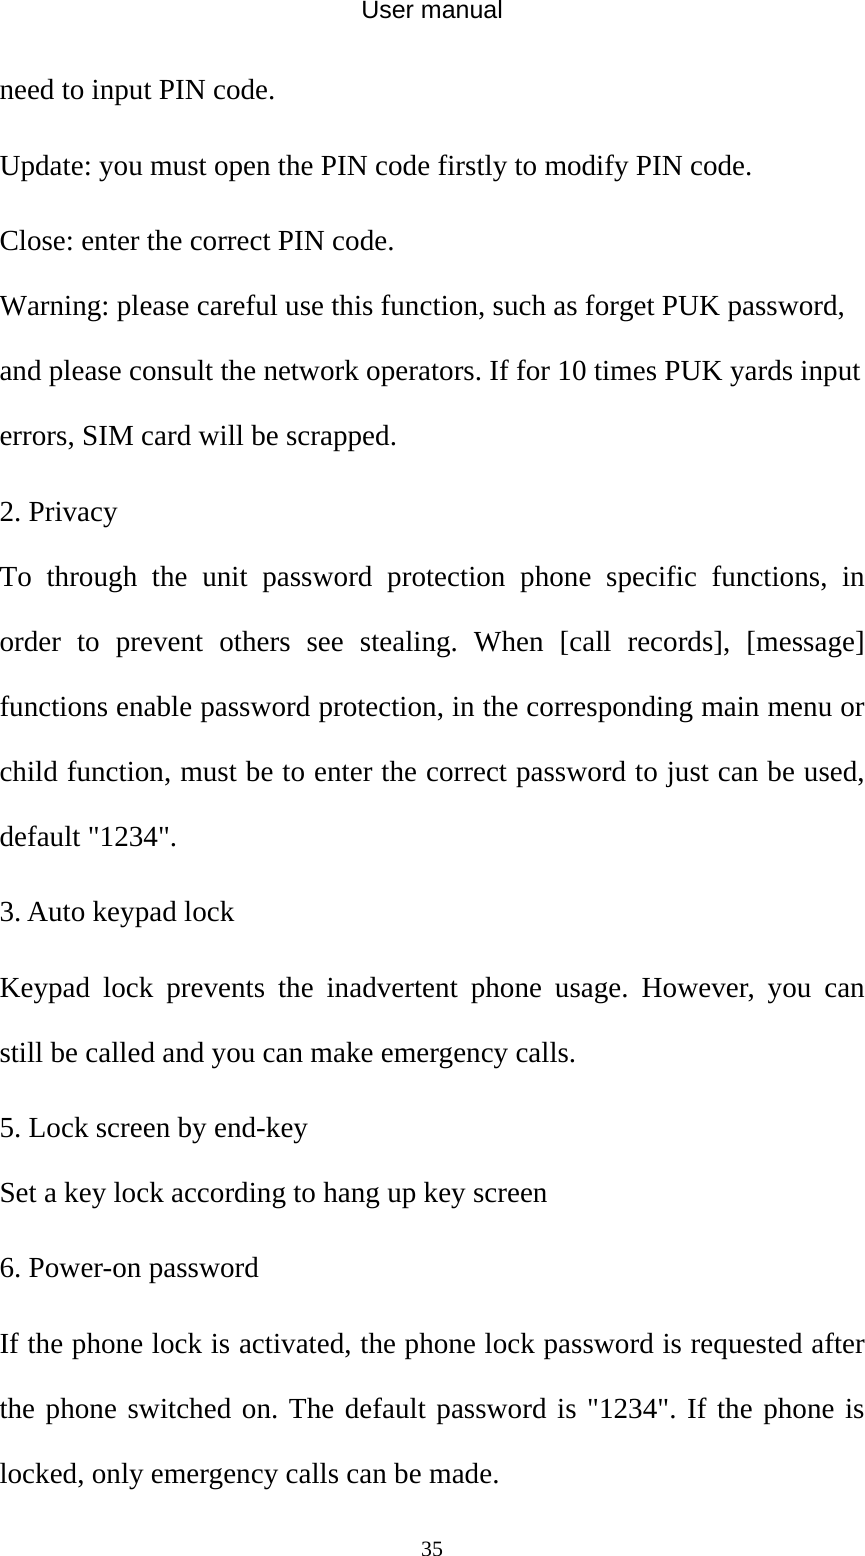 User manual  35need to input PIN code.   Update: you must open the PIN code firstly to modify PIN code. Close: enter the correct PIN code. Warning: please careful use this function, such as forget PUK password, and please consult the network operators. If for 10 times PUK yards input errors, SIM card will be scrapped. 2. Privacy To through the unit password protection phone specific functions, in order to prevent others see stealing. When [call records], [message] functions enable password protection, in the corresponding main menu or child function, must be to enter the correct password to just can be used, default &quot;1234&quot;. 3. Auto keypad lock Keypad lock prevents the inadvertent phone usage. However, you can still be called and you can make emergency calls. 5. Lock screen by end-key Set a key lock according to hang up key screen 6. Power-on password If the phone lock is activated, the phone lock password is requested after the phone switched on. The default password is &quot;1234&quot;. If the phone is locked, only emergency calls can be made. 